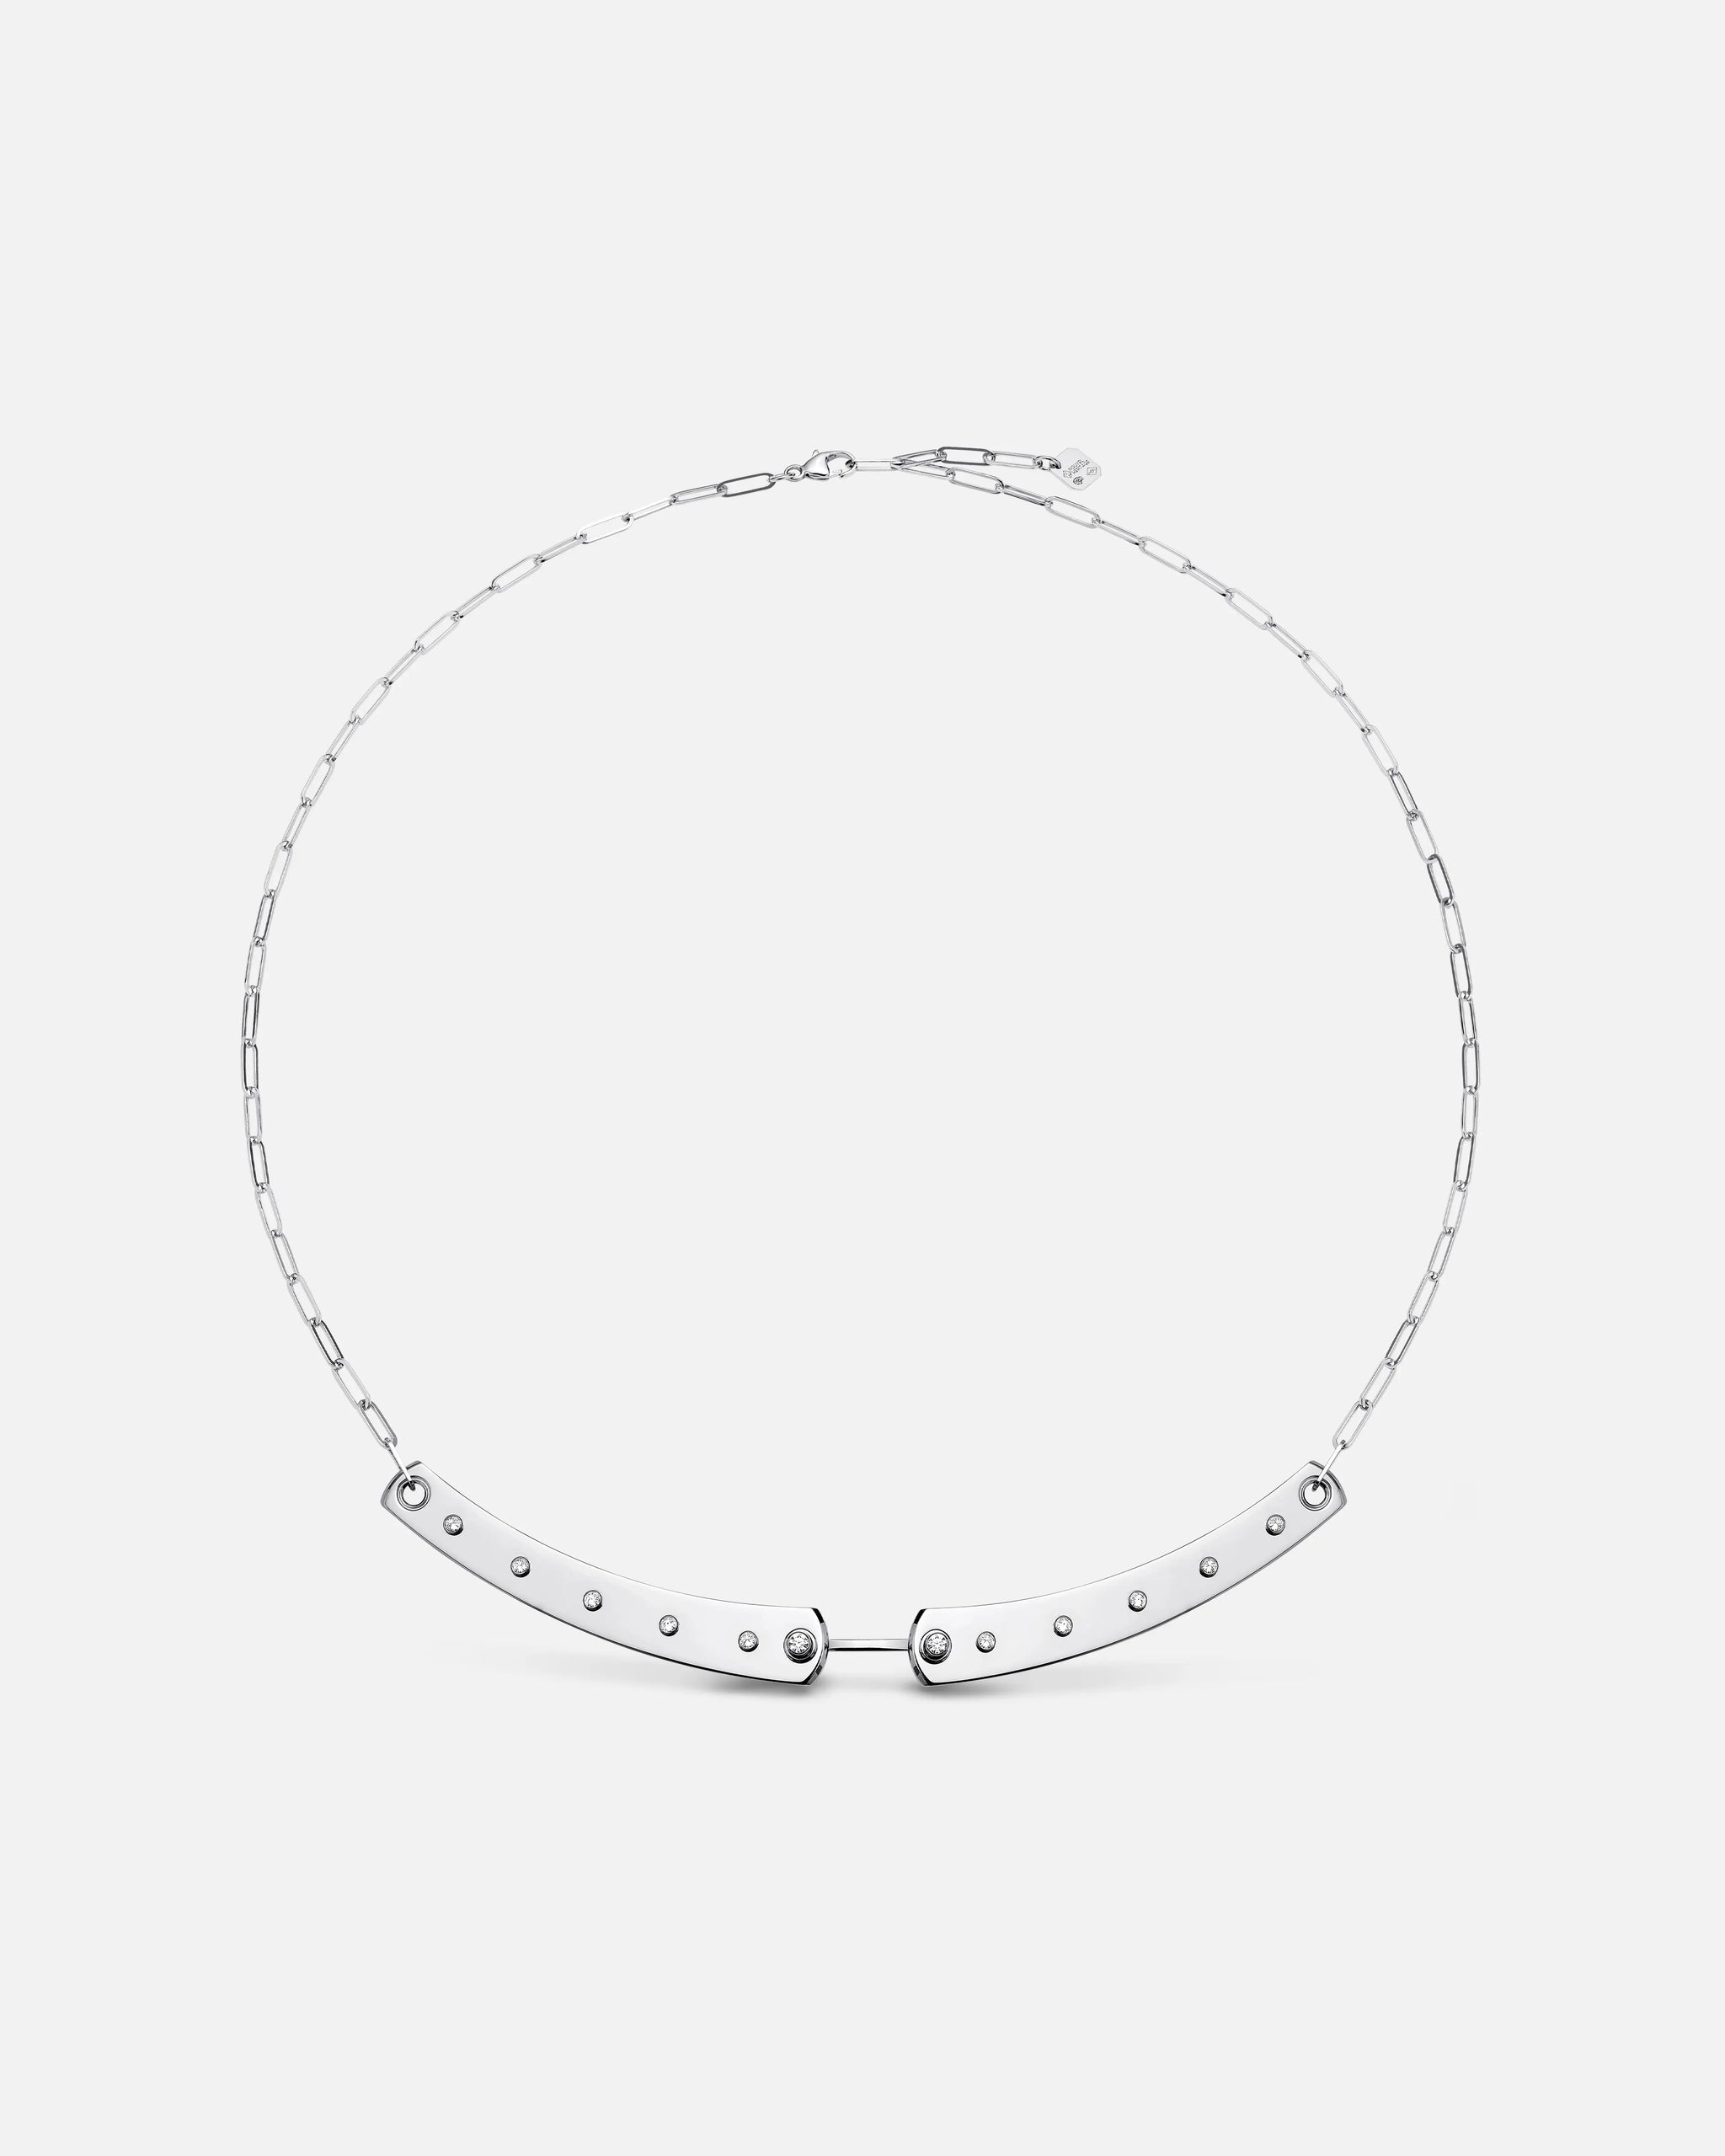 Brunch in NY Mood Necklace in White Gold - 1 - Nouvel Heritage